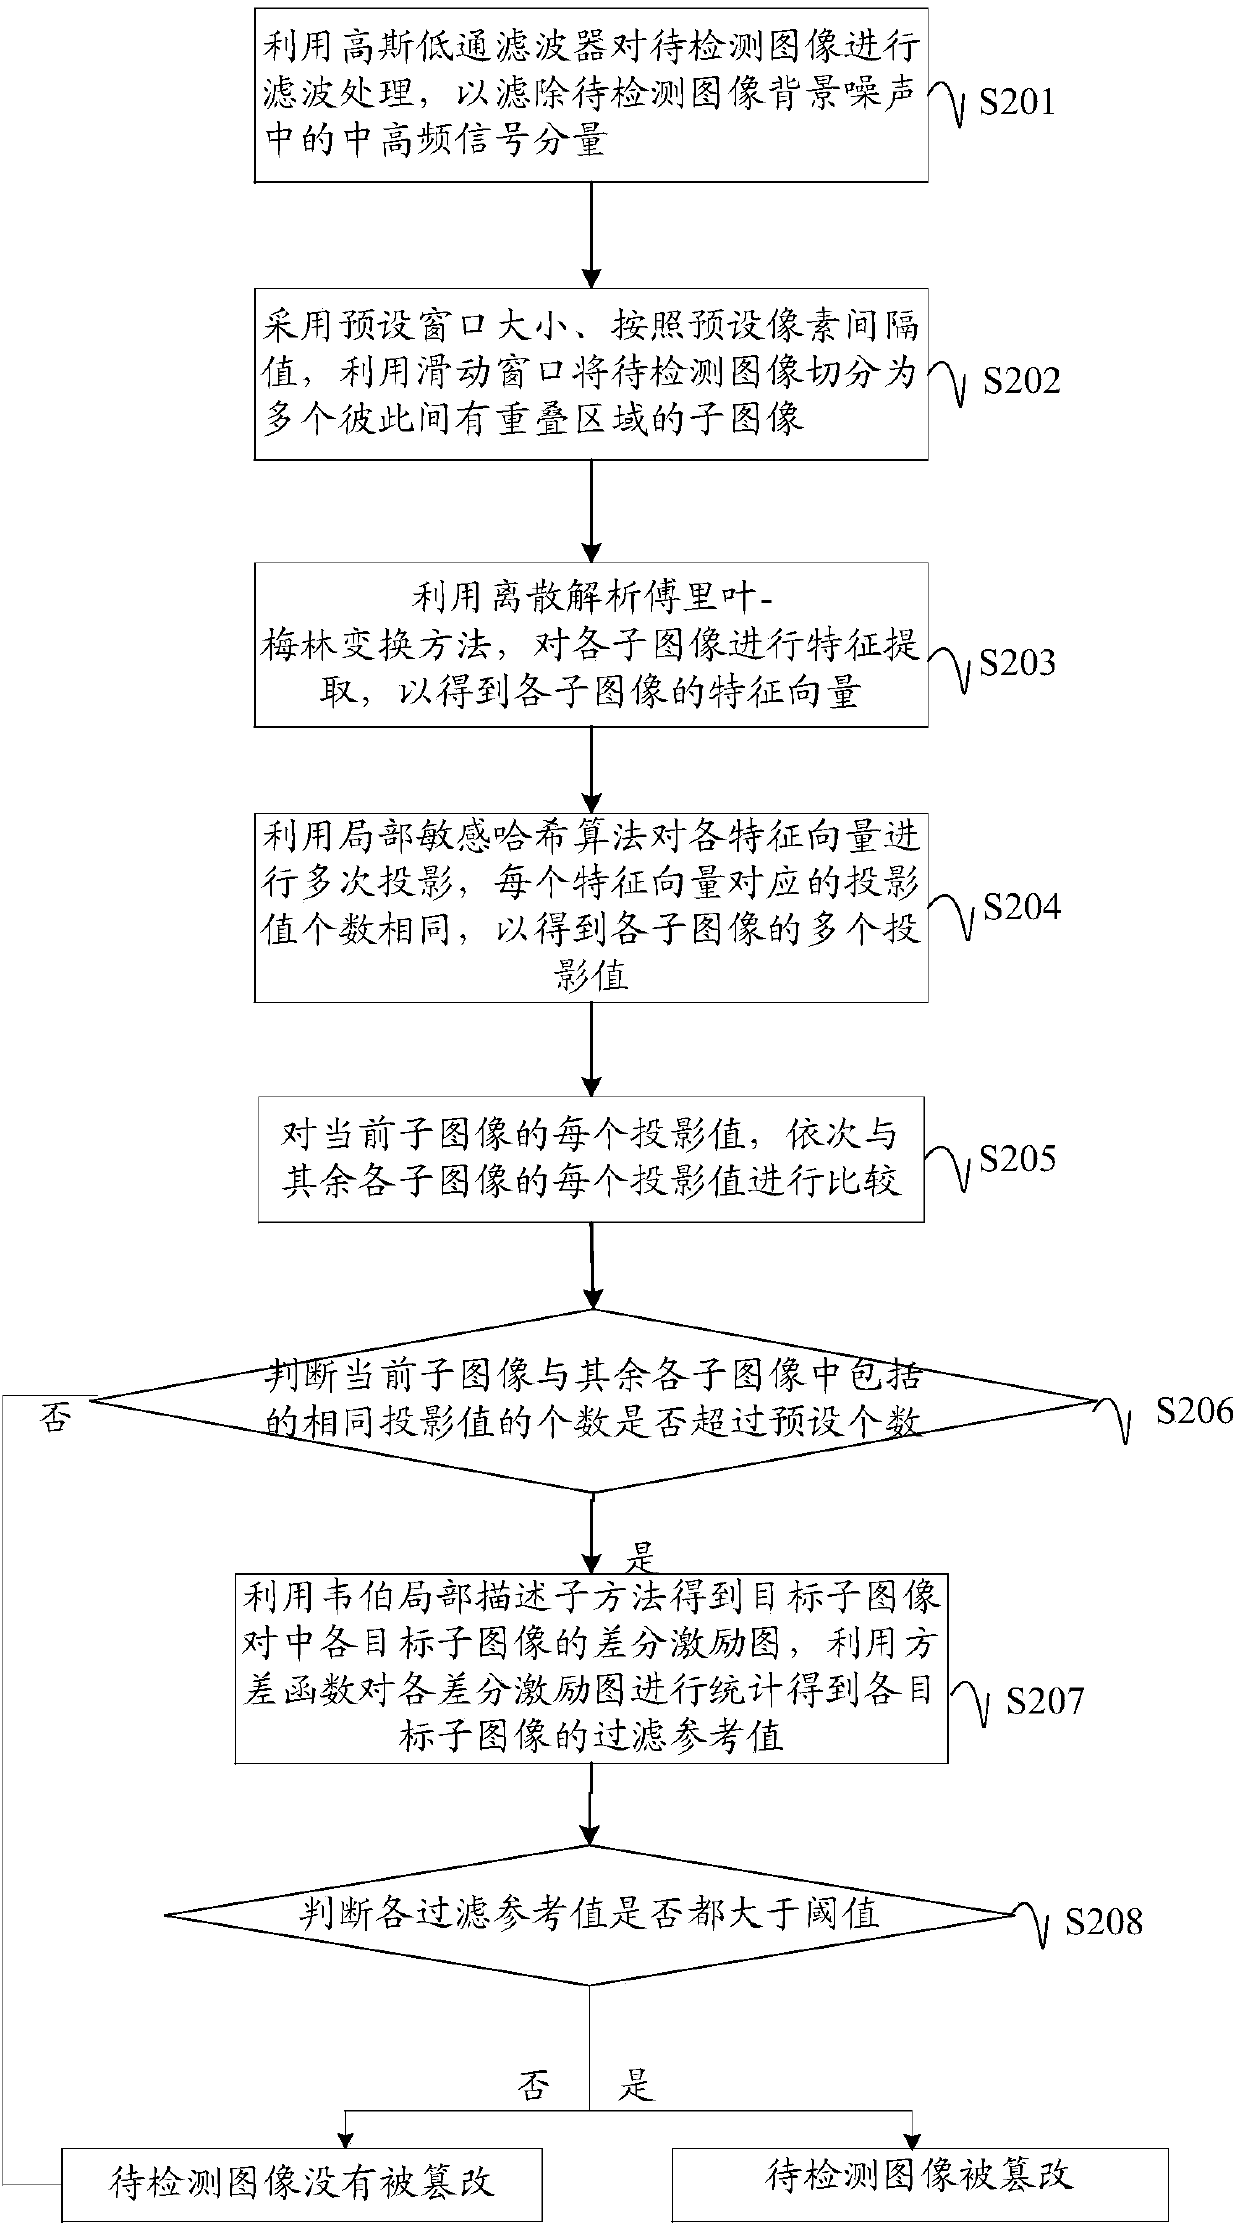 Image tampering detection method and device